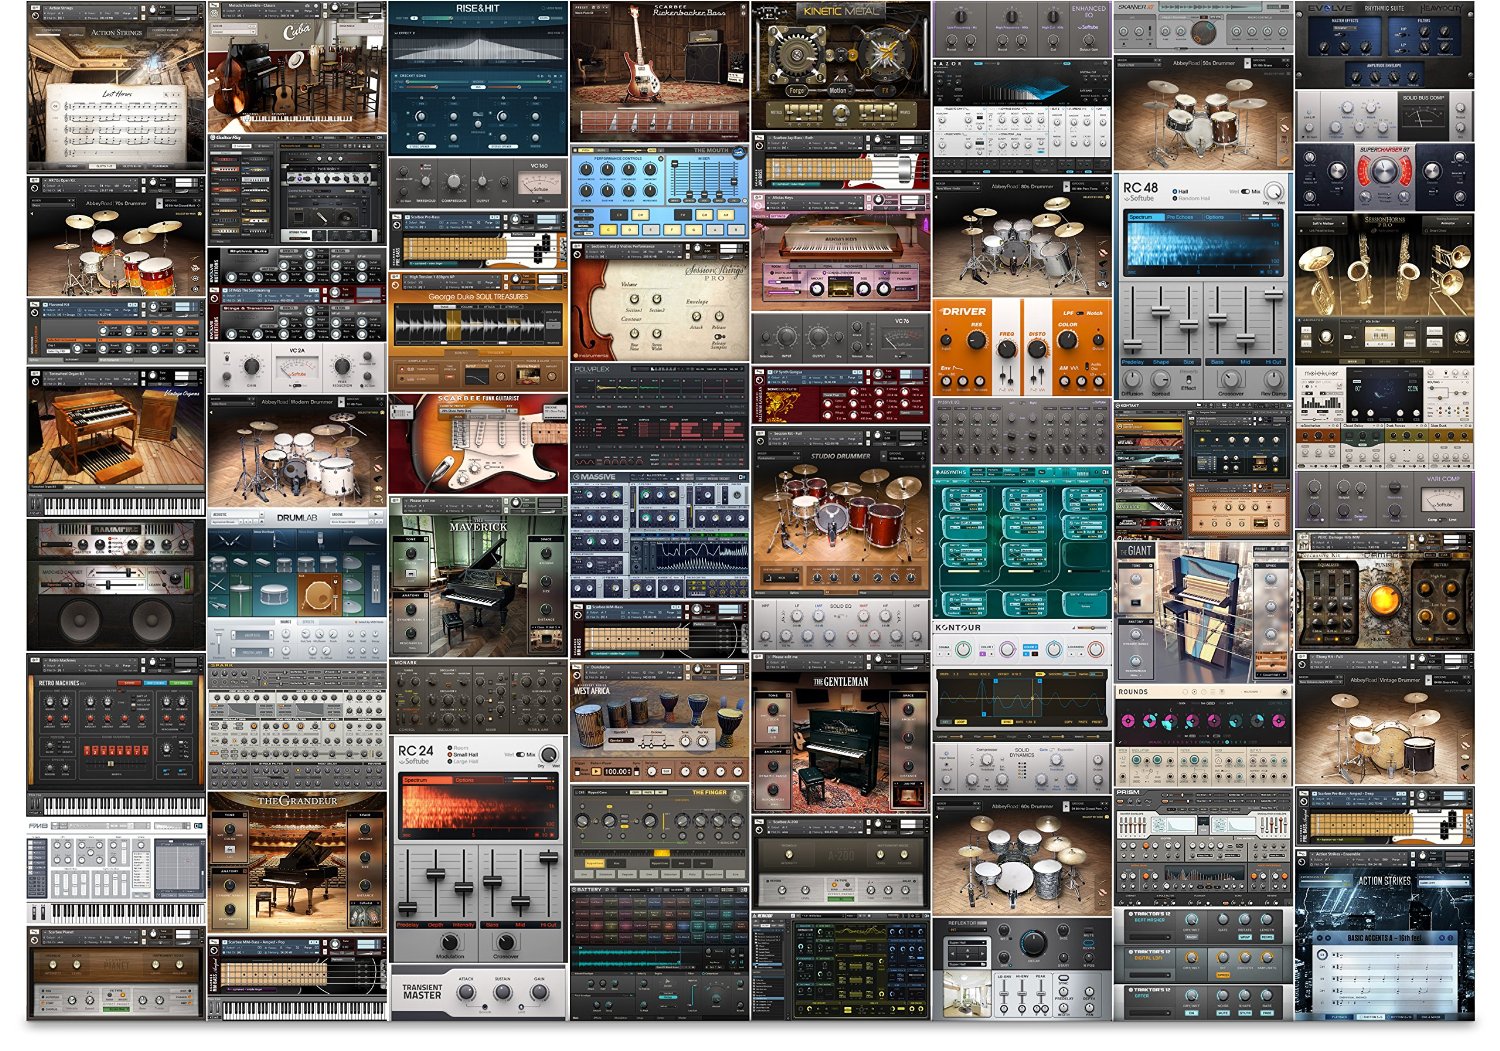 https://9to5mac.com/wp-content/uploads/sites/6/2015/09/native-instruments-the-logic-pros-01.jpg?quality=82&strip=all